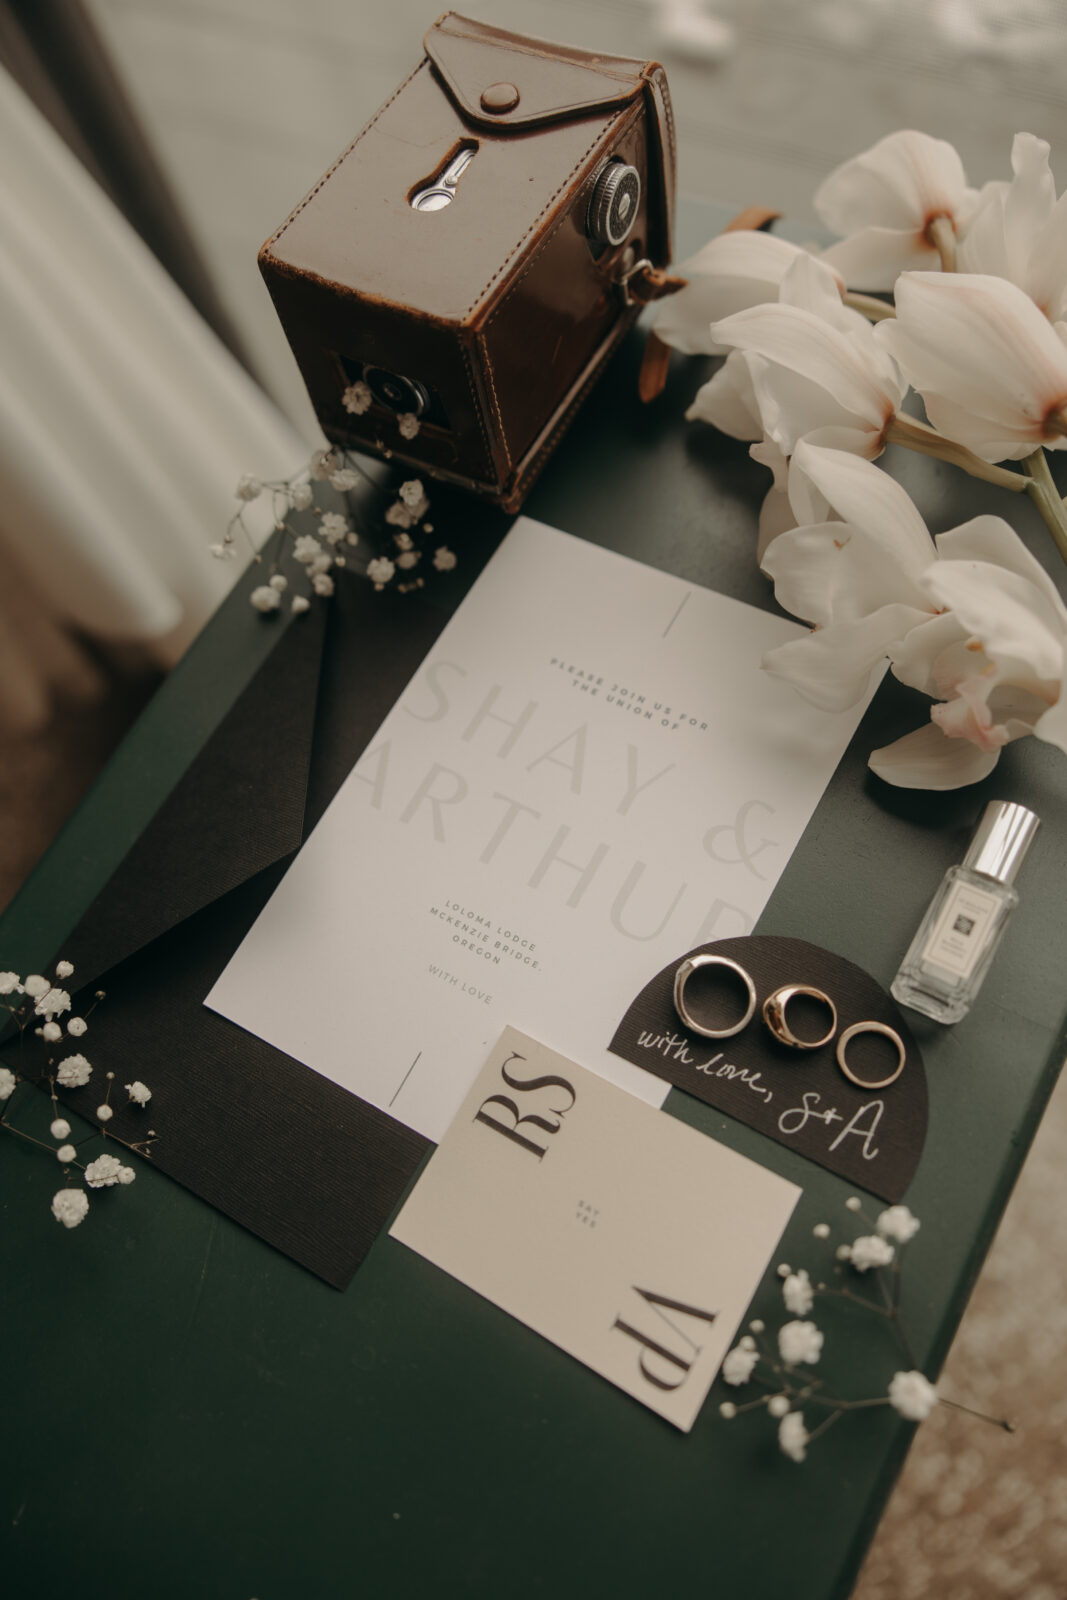 Elopement invitation, wedding rings, flowers, and details